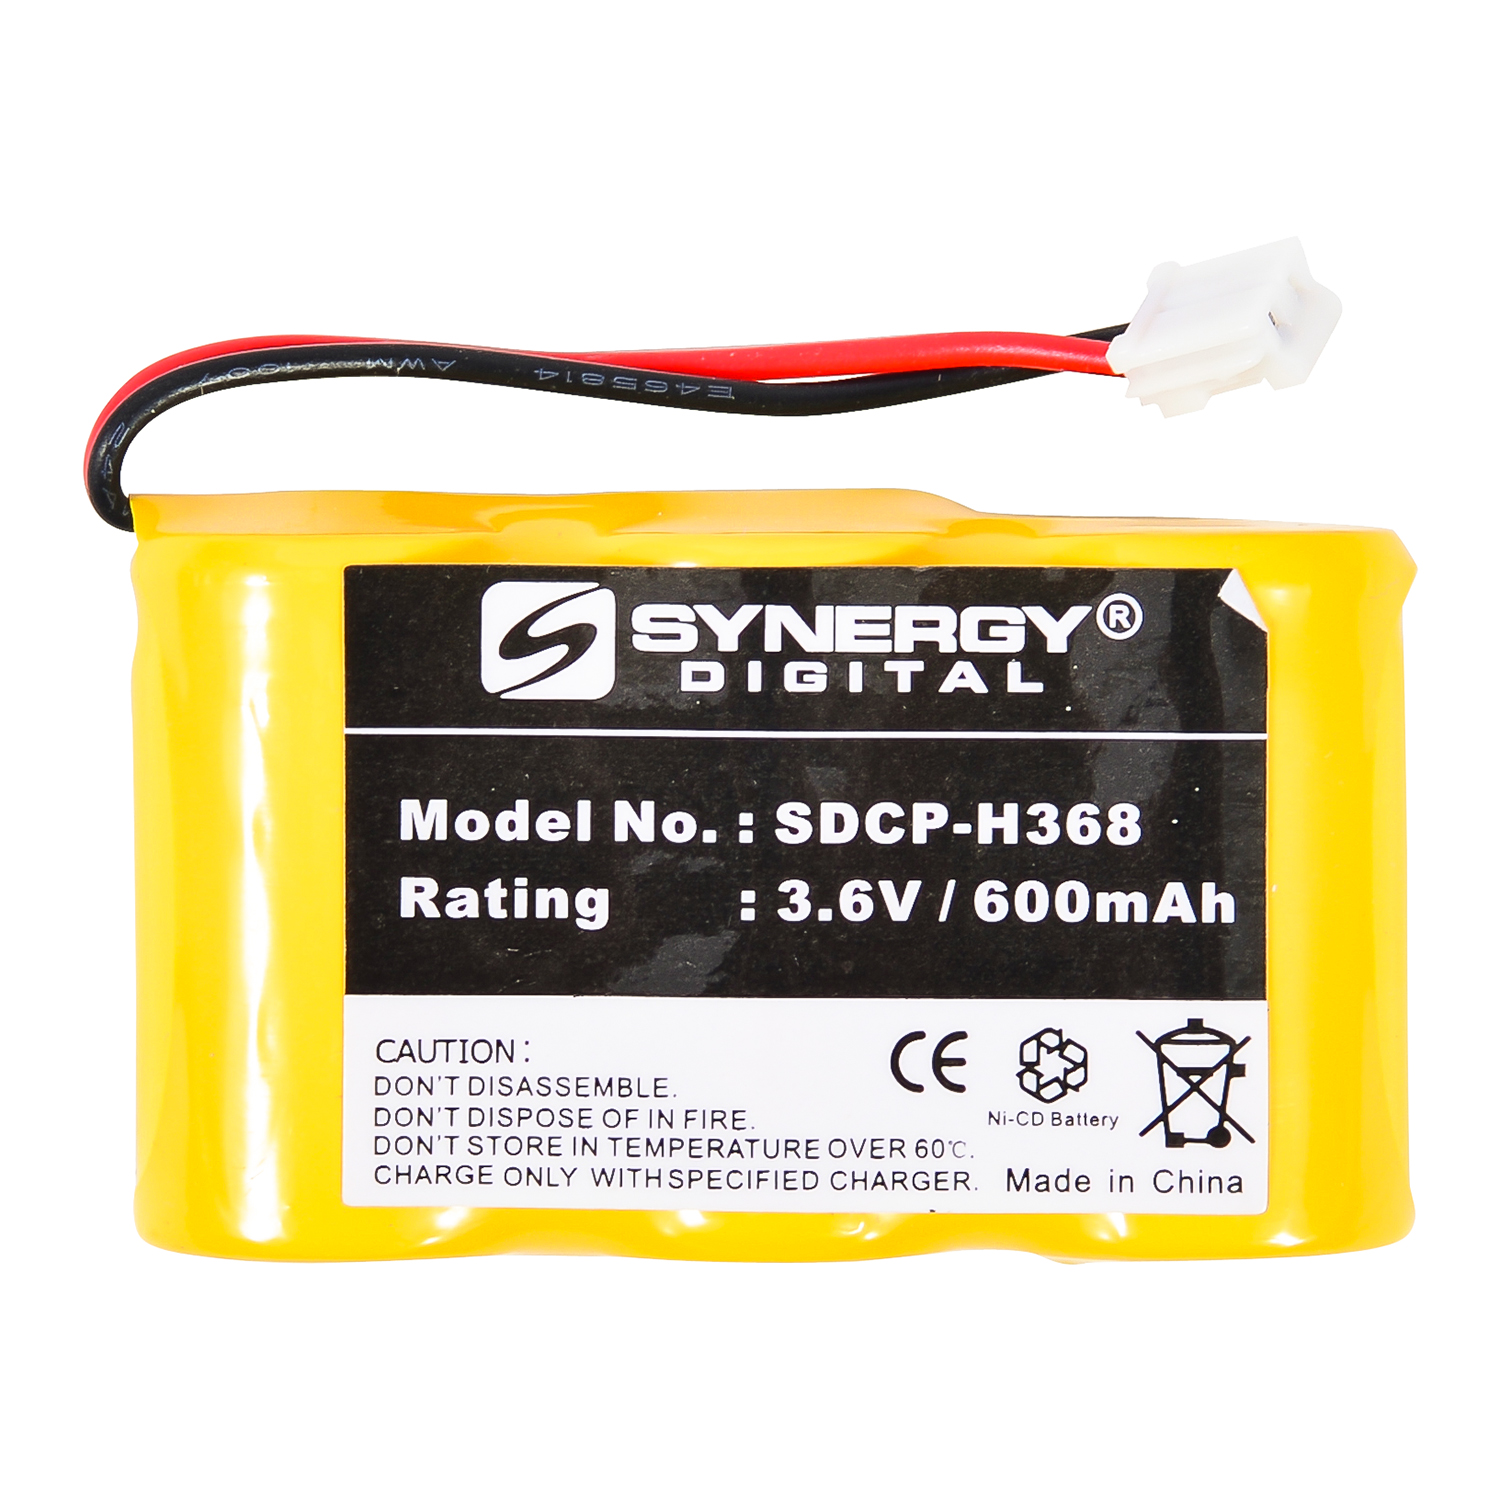 EM-CPB-446D - Ni-CD 1X3-2/3AF/D, 3.6 Volt, 600 mAh, Ultra Hi-Capacity Battery - Replacement Battery for Rechargeable Cordless Phone Battery